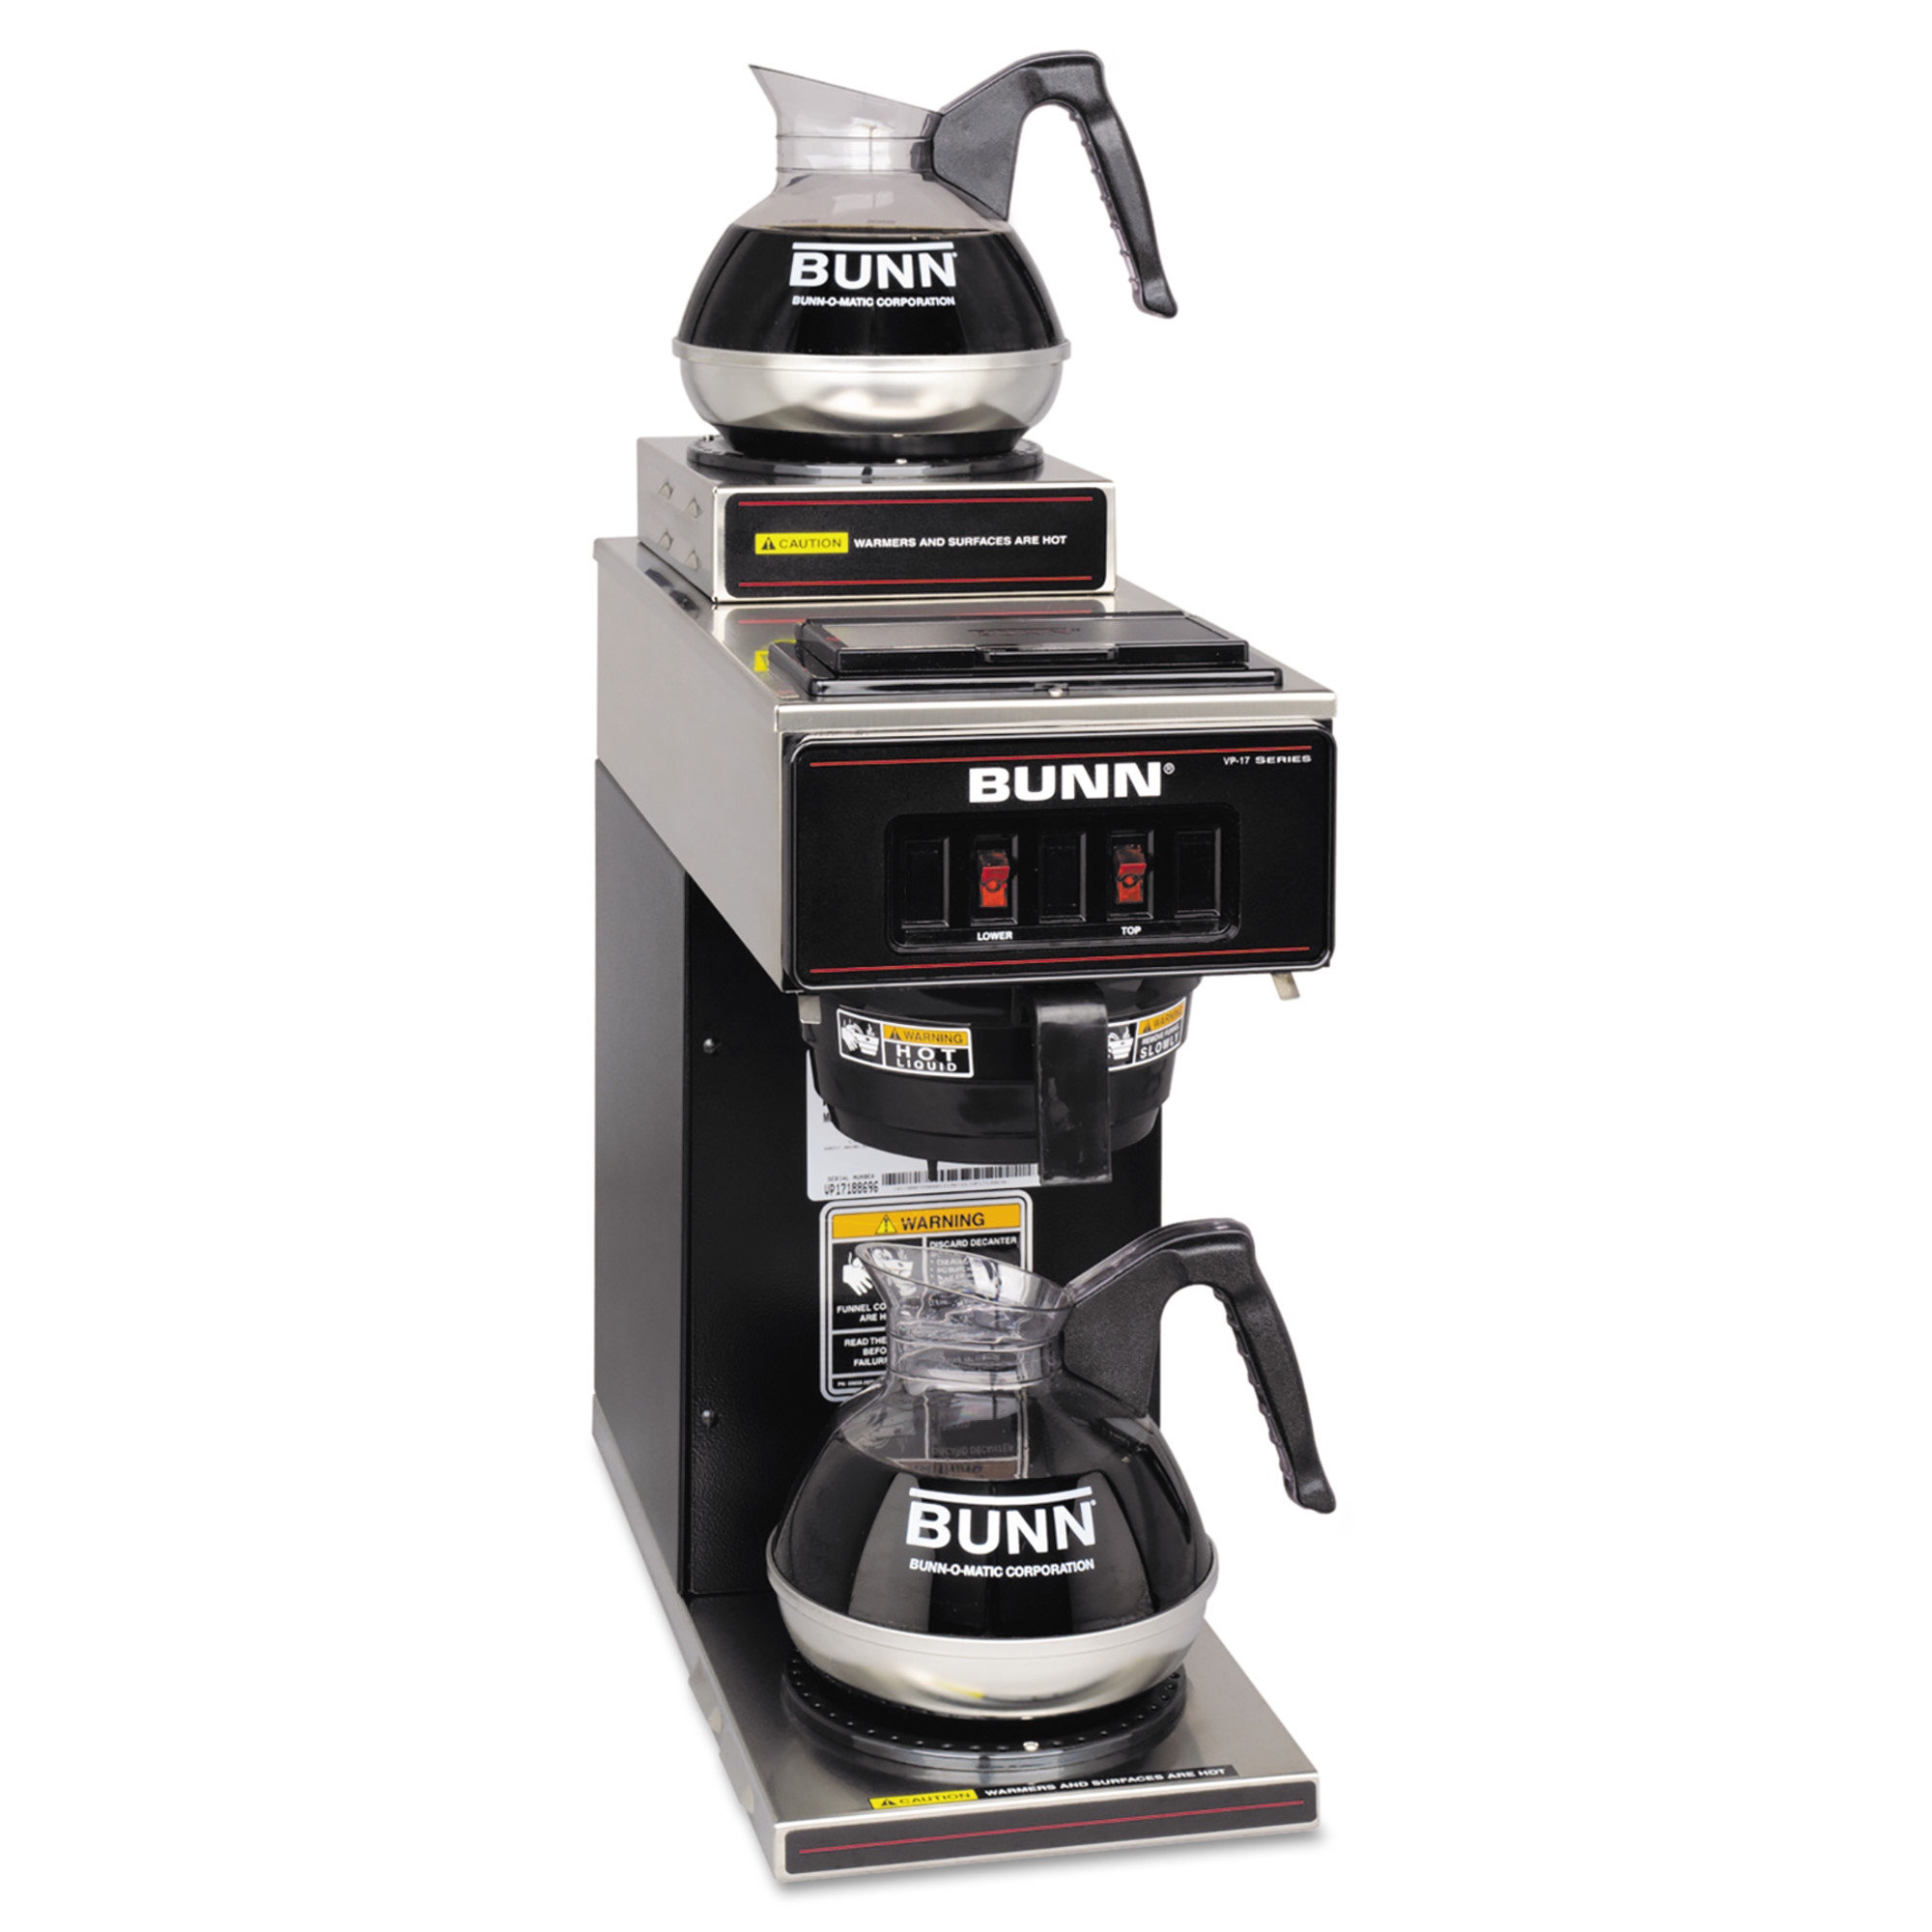 BUNN GR-White Pour-omatic Coffee Brewer Maker Tested